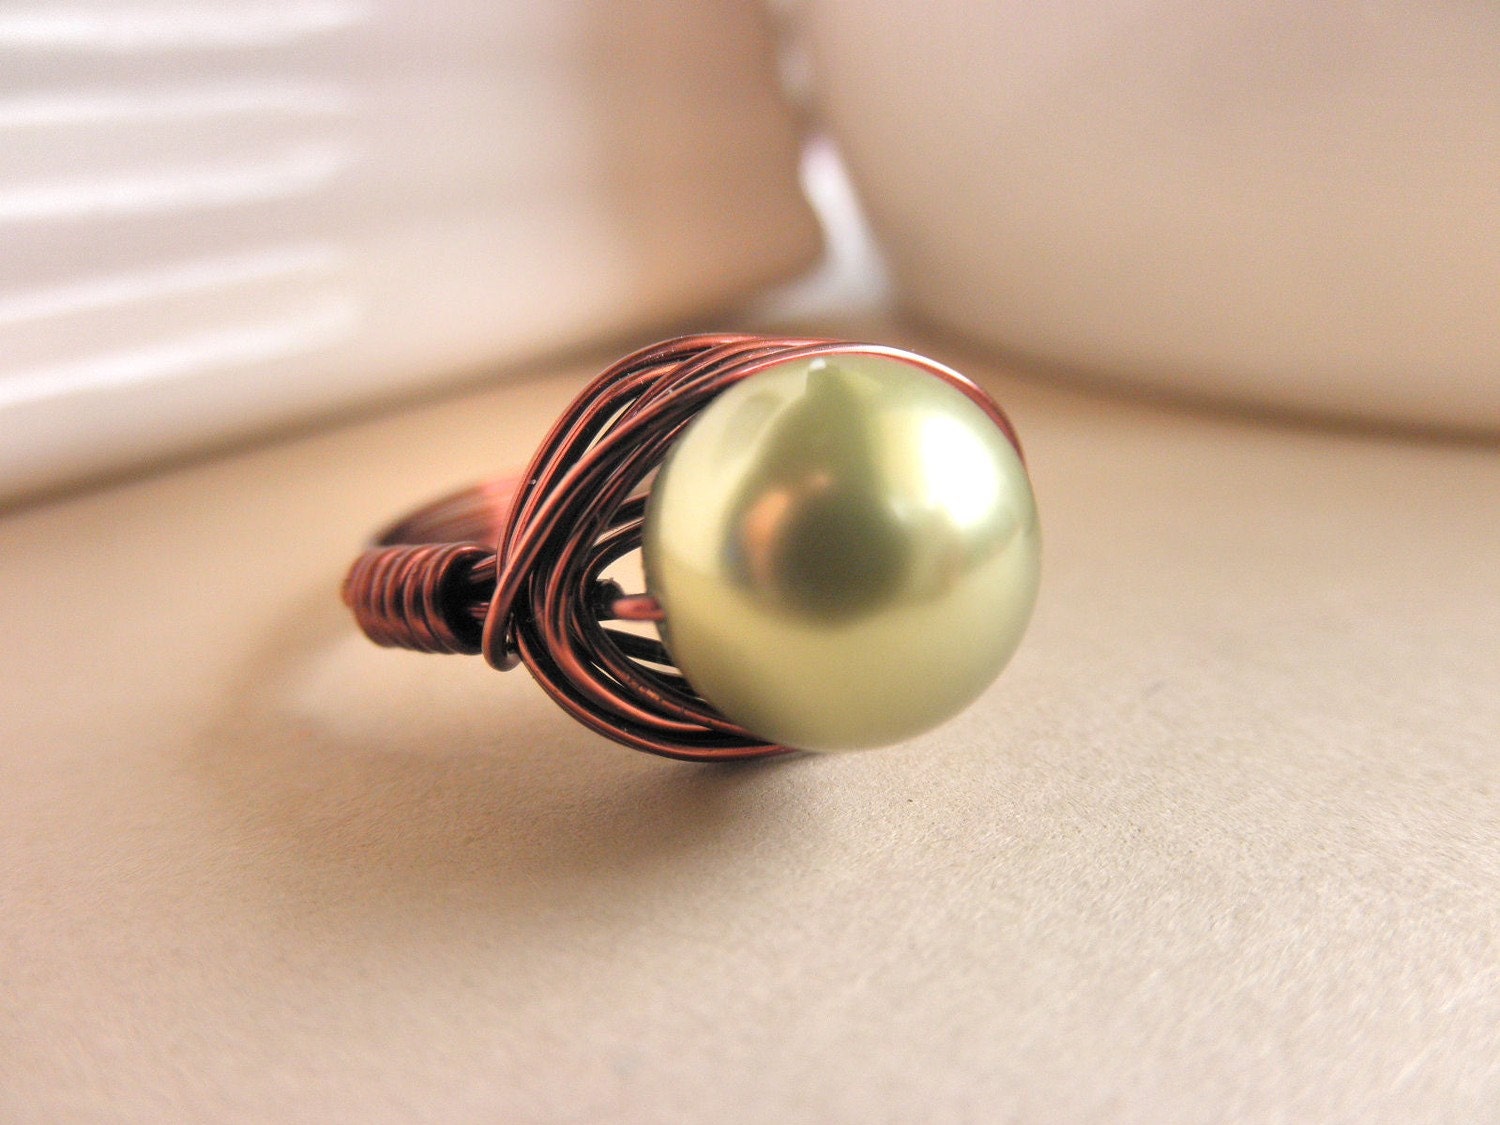 Handmade Ring - Size 10 - Swarovski Pearl - Bronze, Light brown, Copper, Brown, Green, Olive, Forest, Medium, Simple, Pearl, Classic, Pretty